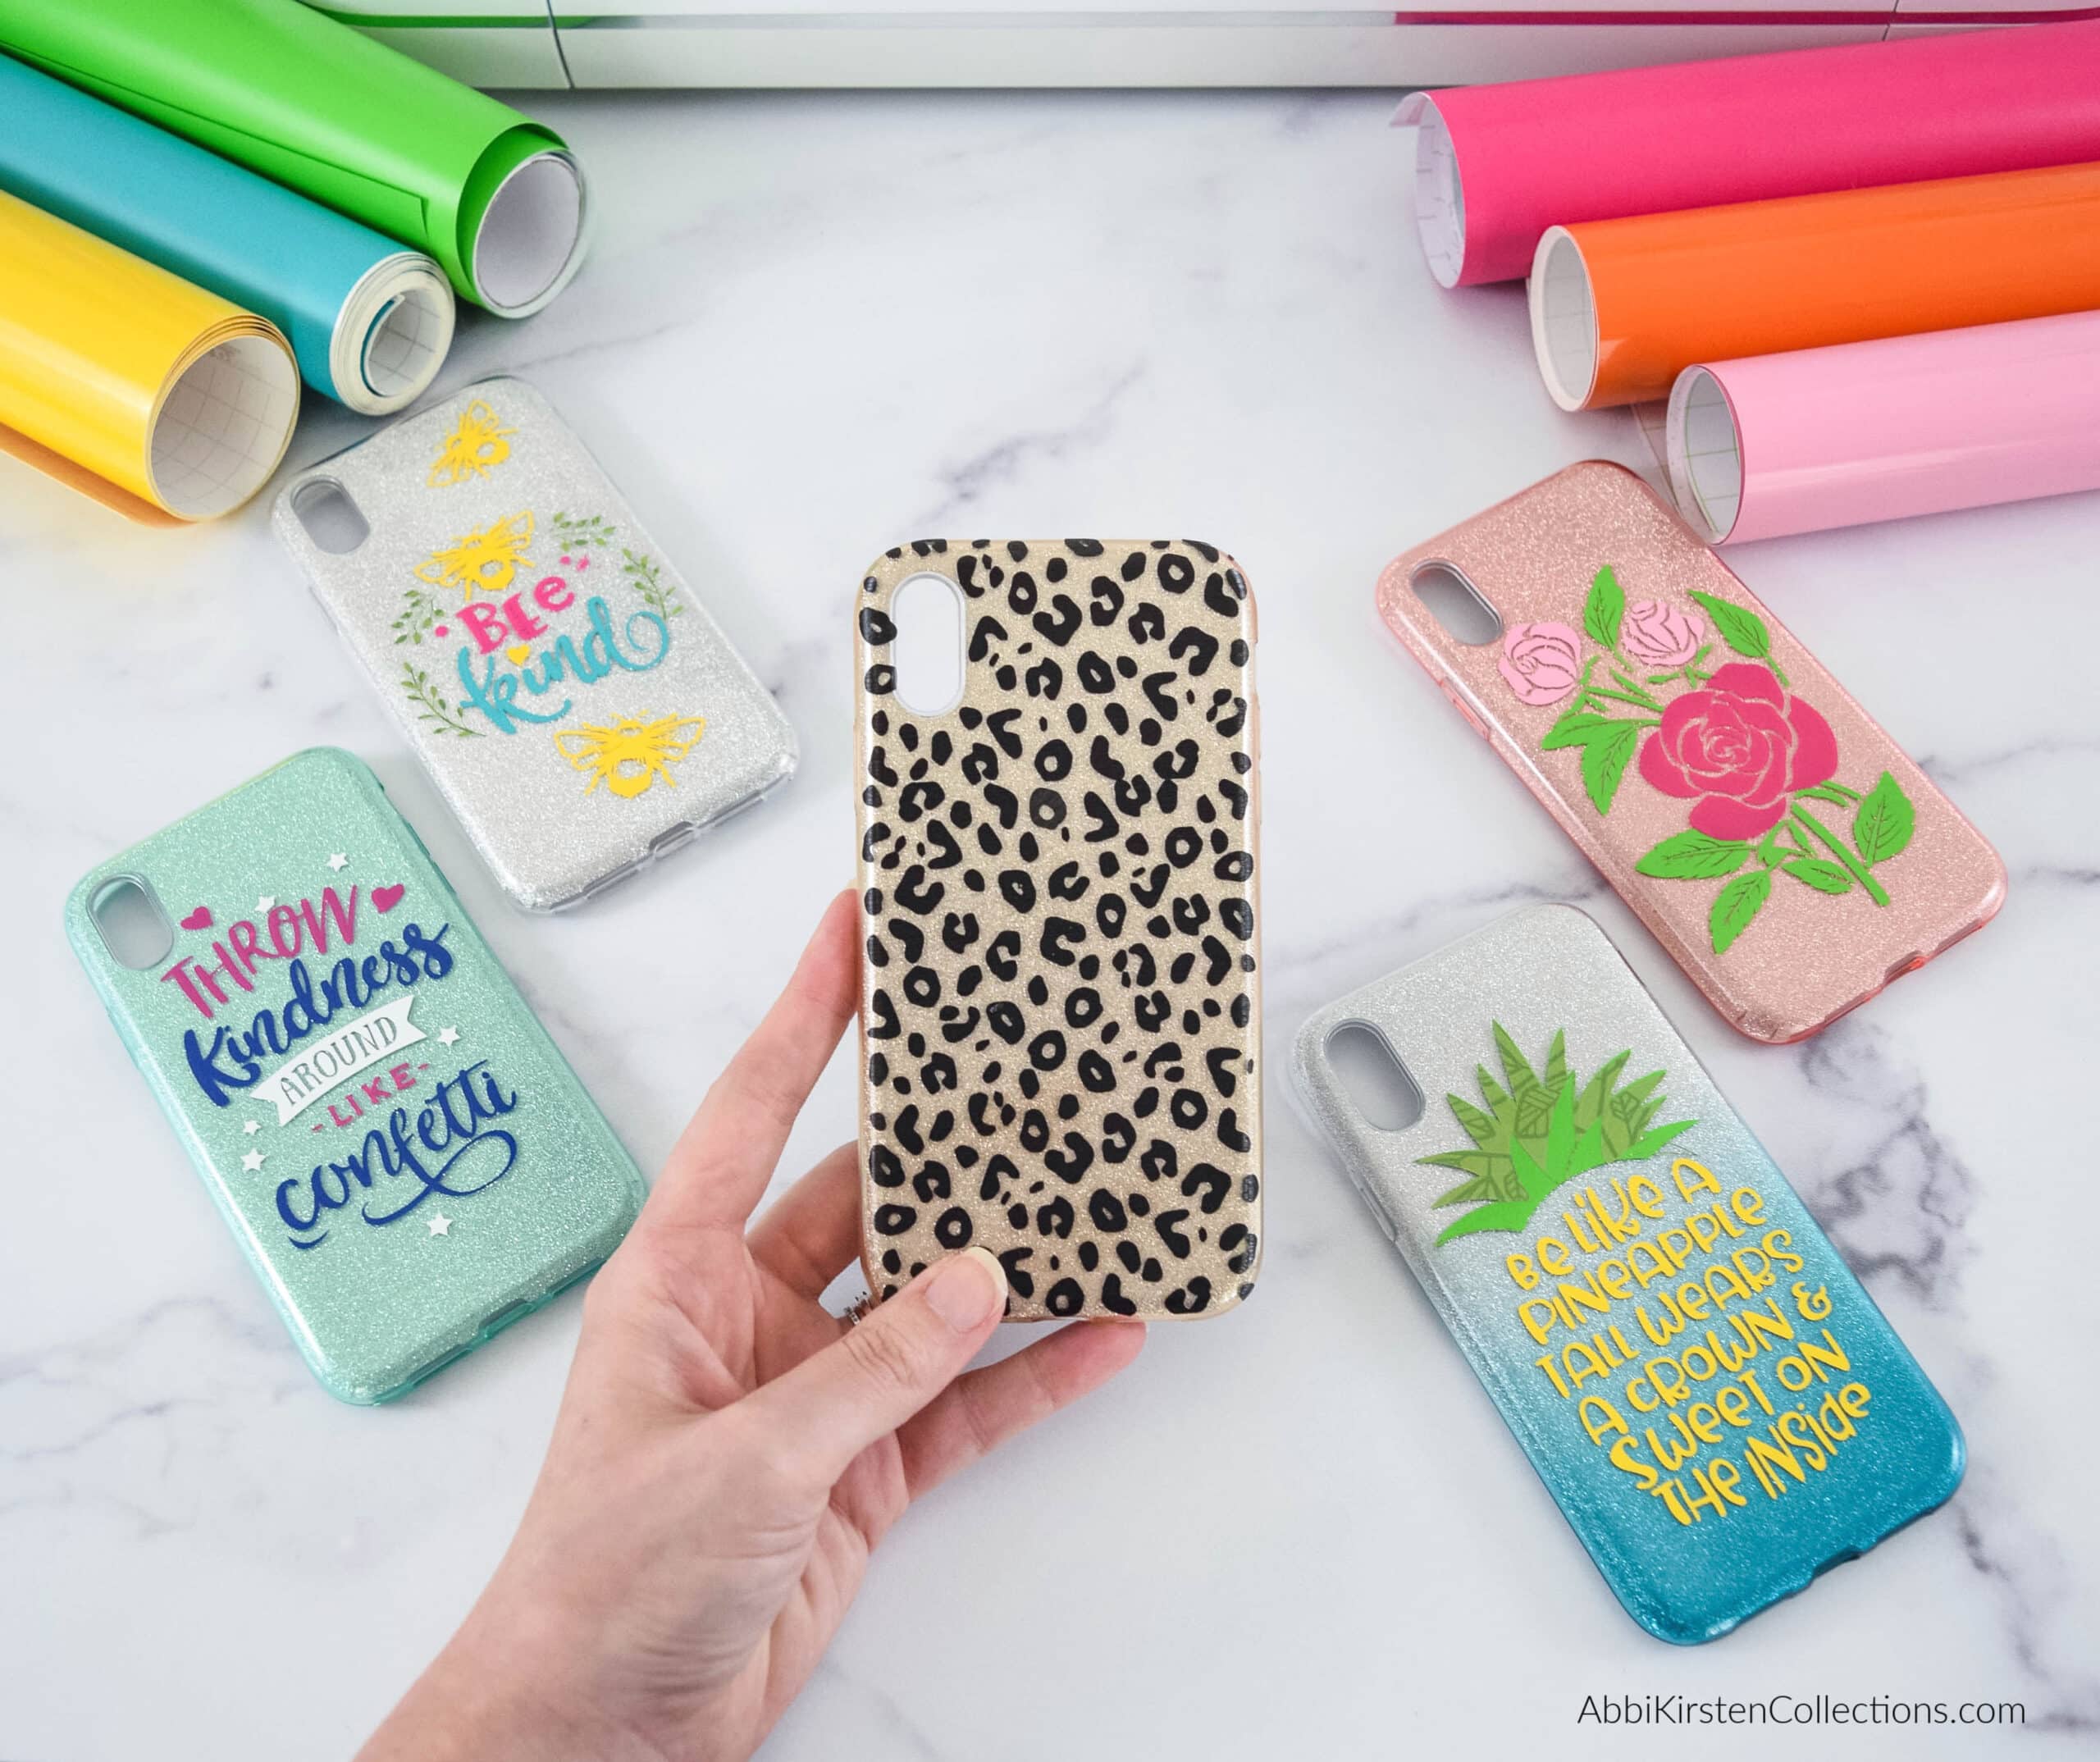 https://www.abbikirstencollections.com/wp-content/uploads/2020/07/DIY-phone-case-3-scaled.jpg